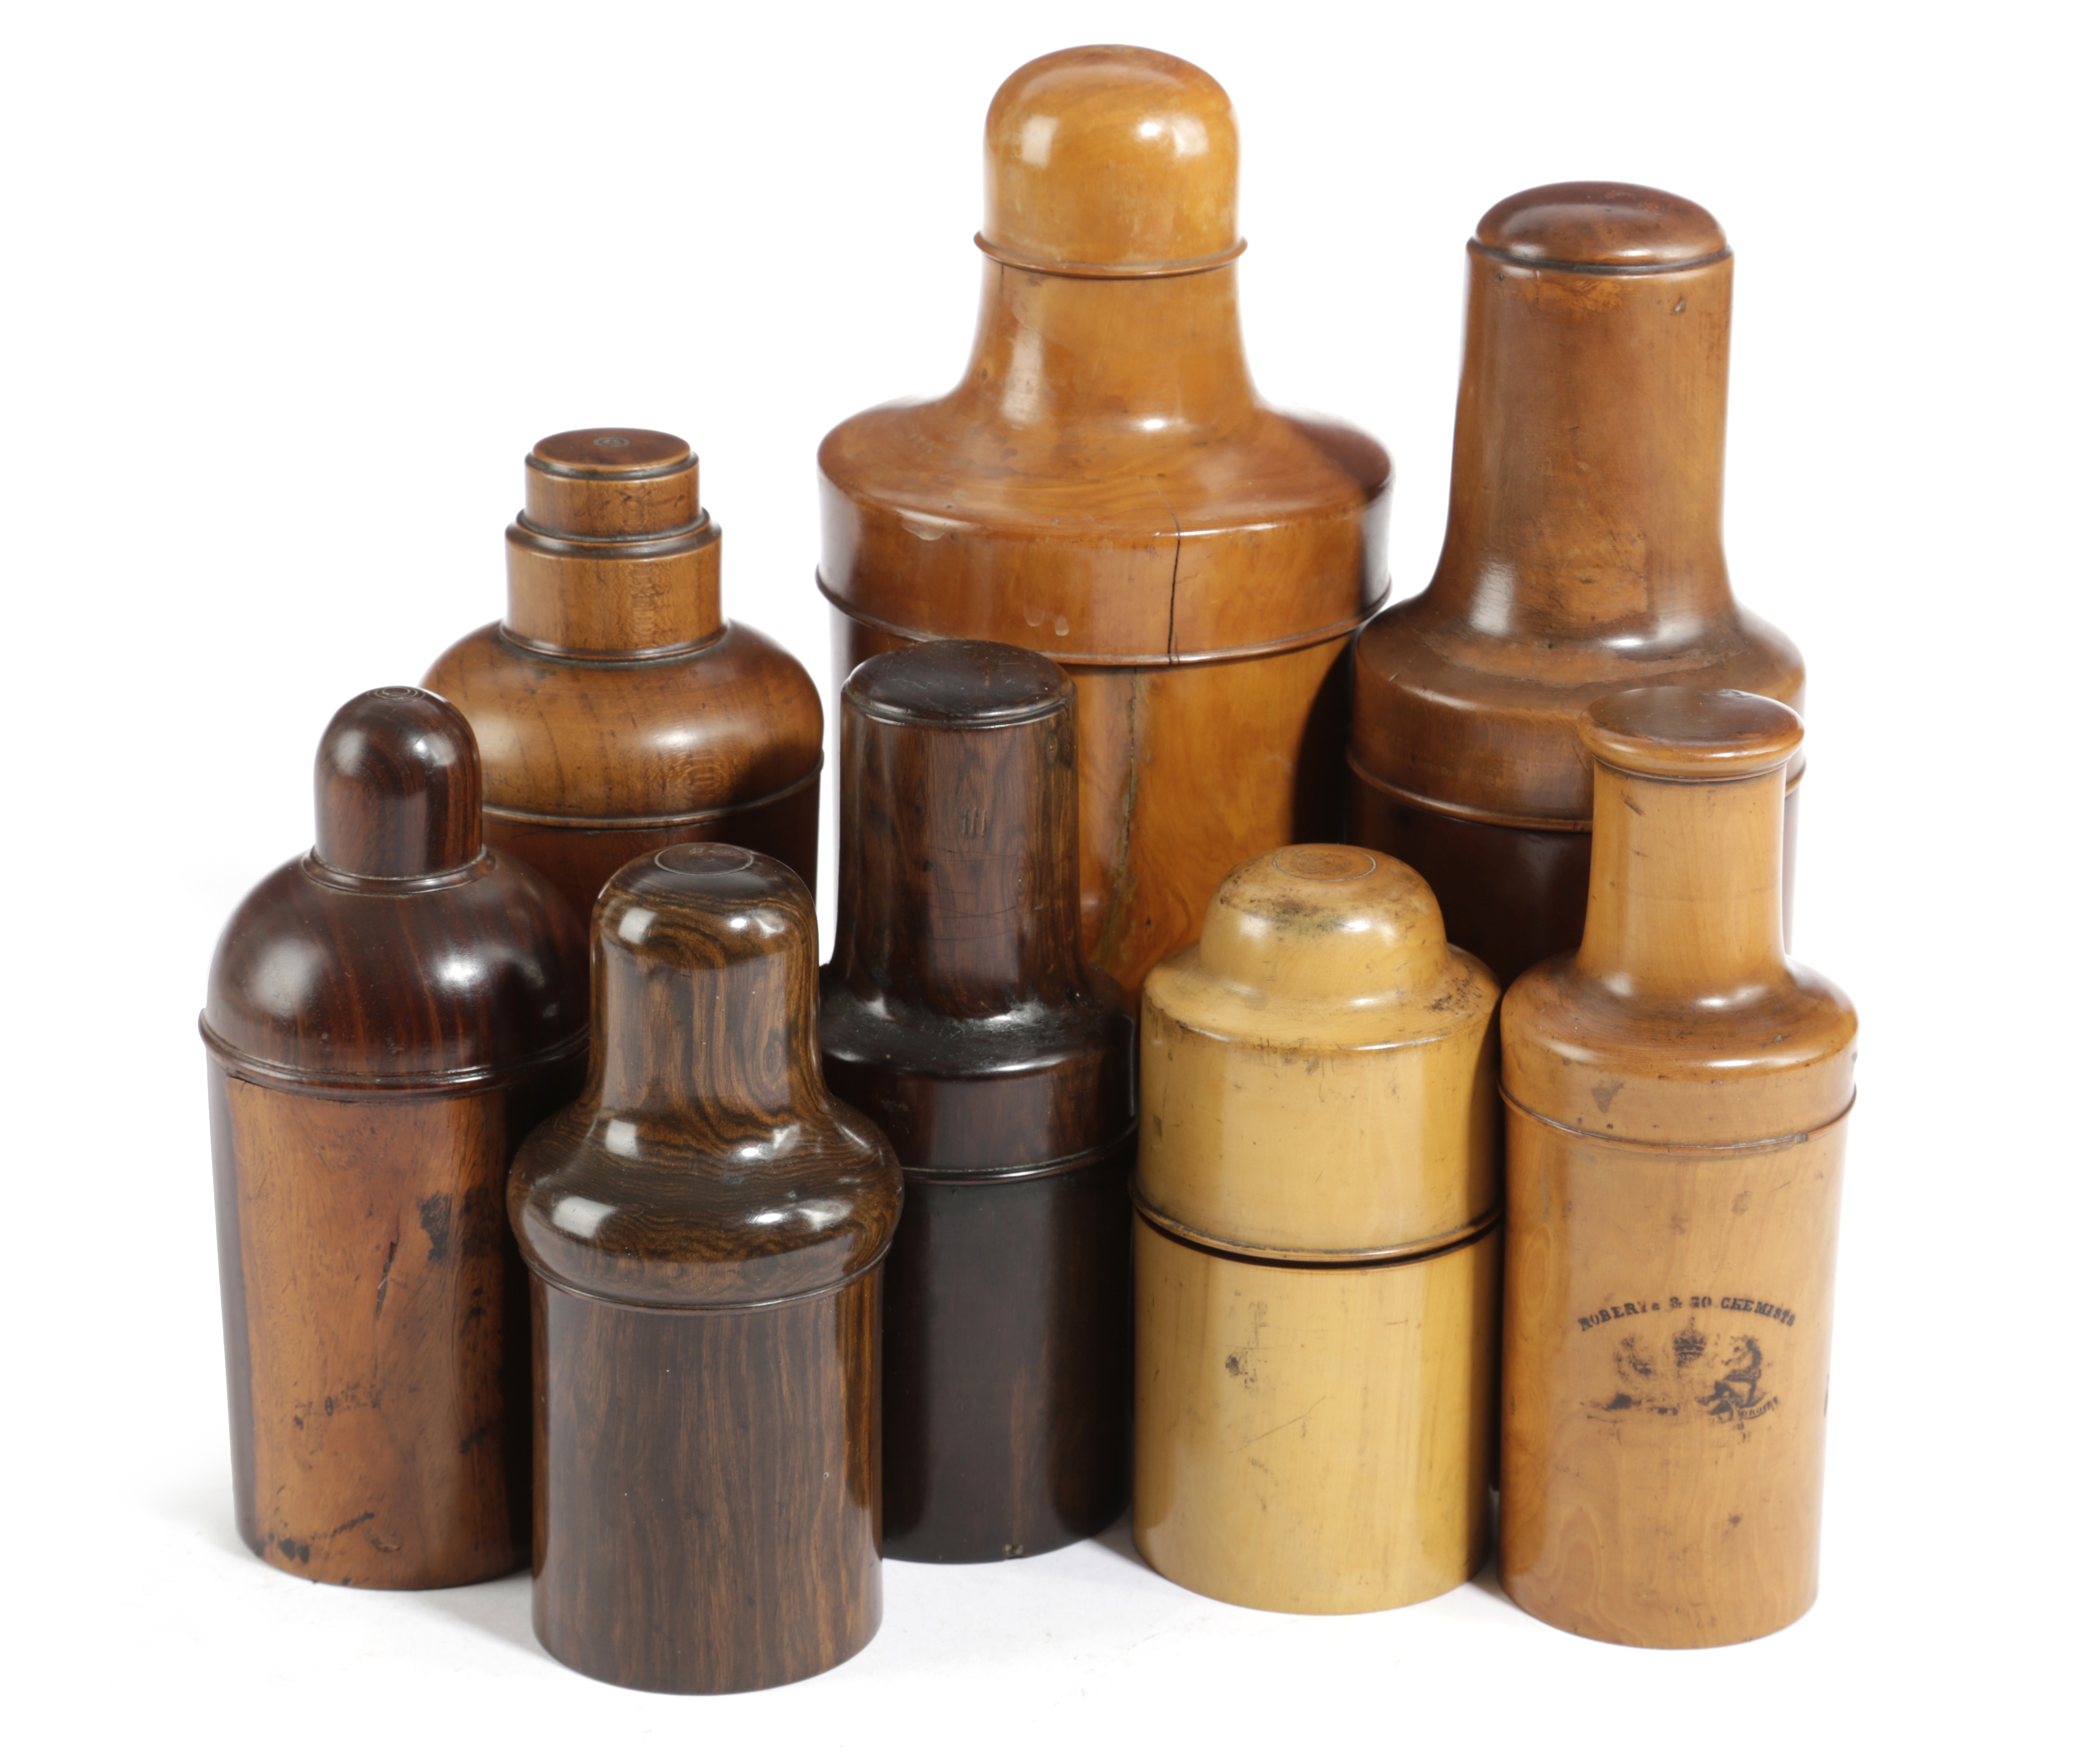 EIGHT TREEN MEDICINE BOTTLE CASES 19TH / EARLY 20TH CENTURY in various woods inlcuding: lignum